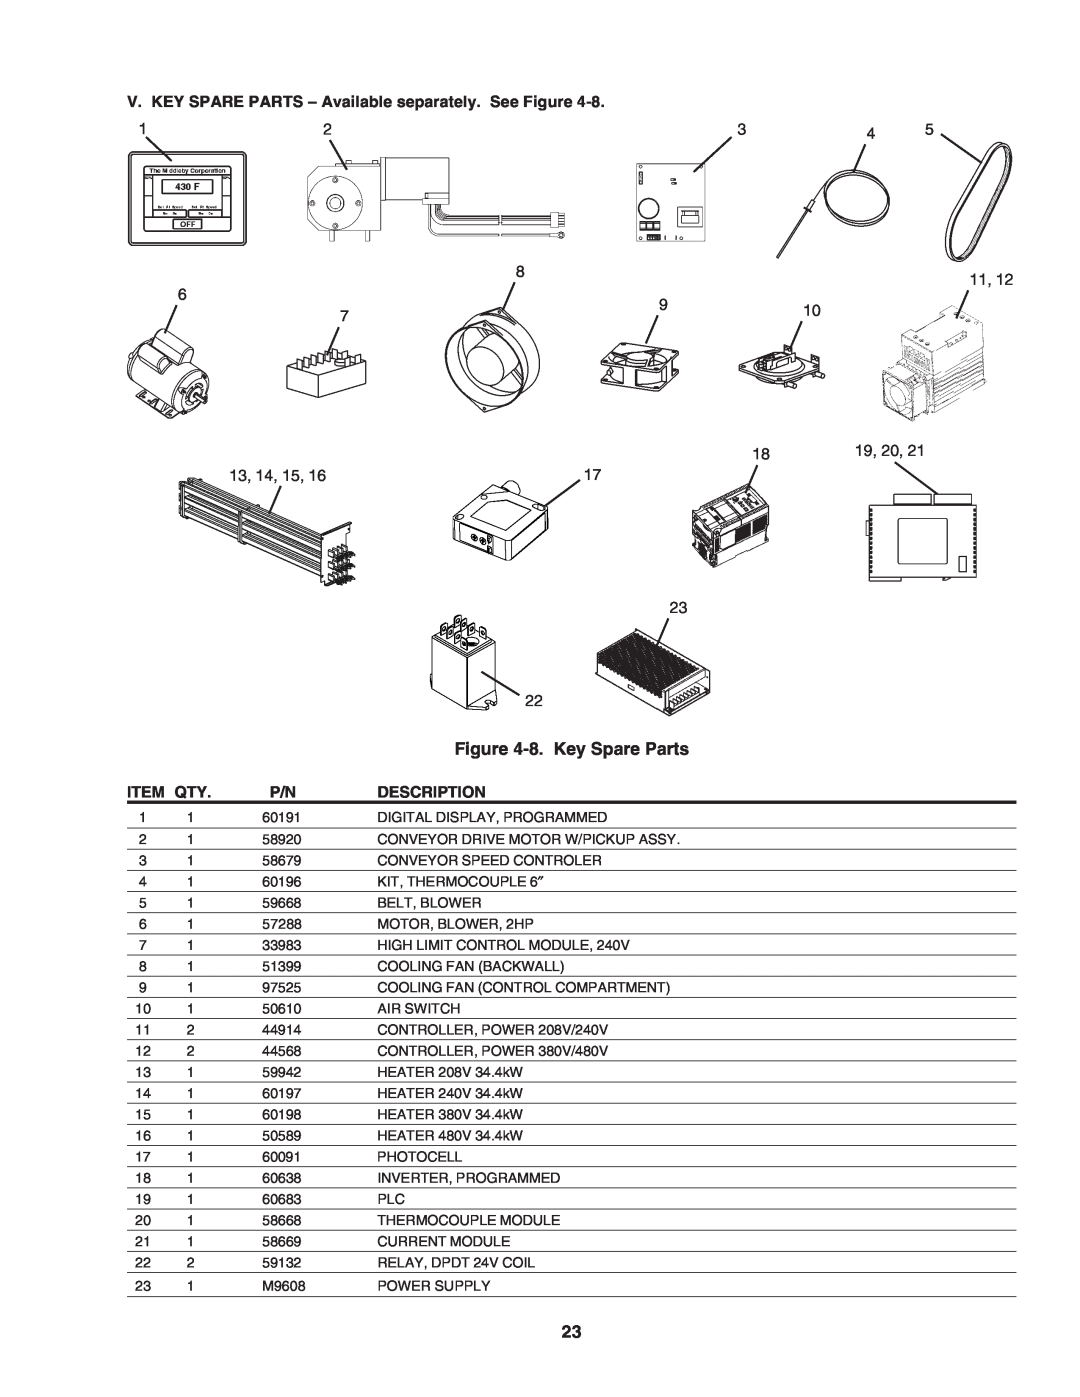 Middleby Marshall PS640E 8. Key Spare Parts, V. KEY SPARE PARTS - Available separately. See Figure, 19, 20, Item Qty 